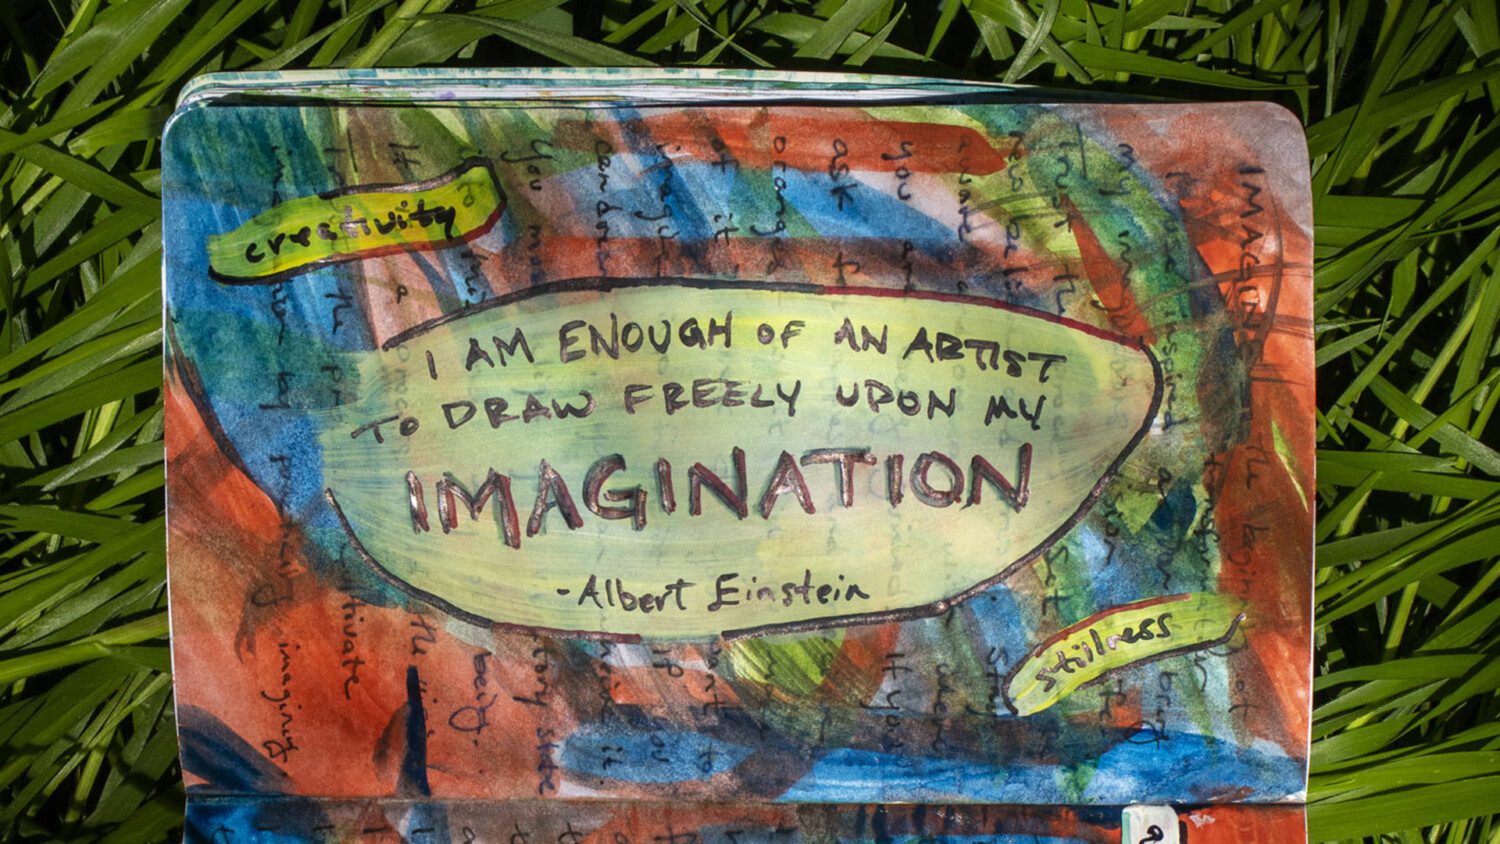 Elevating Consciouness by Merging Imagination with Creativity Through Inspired Action